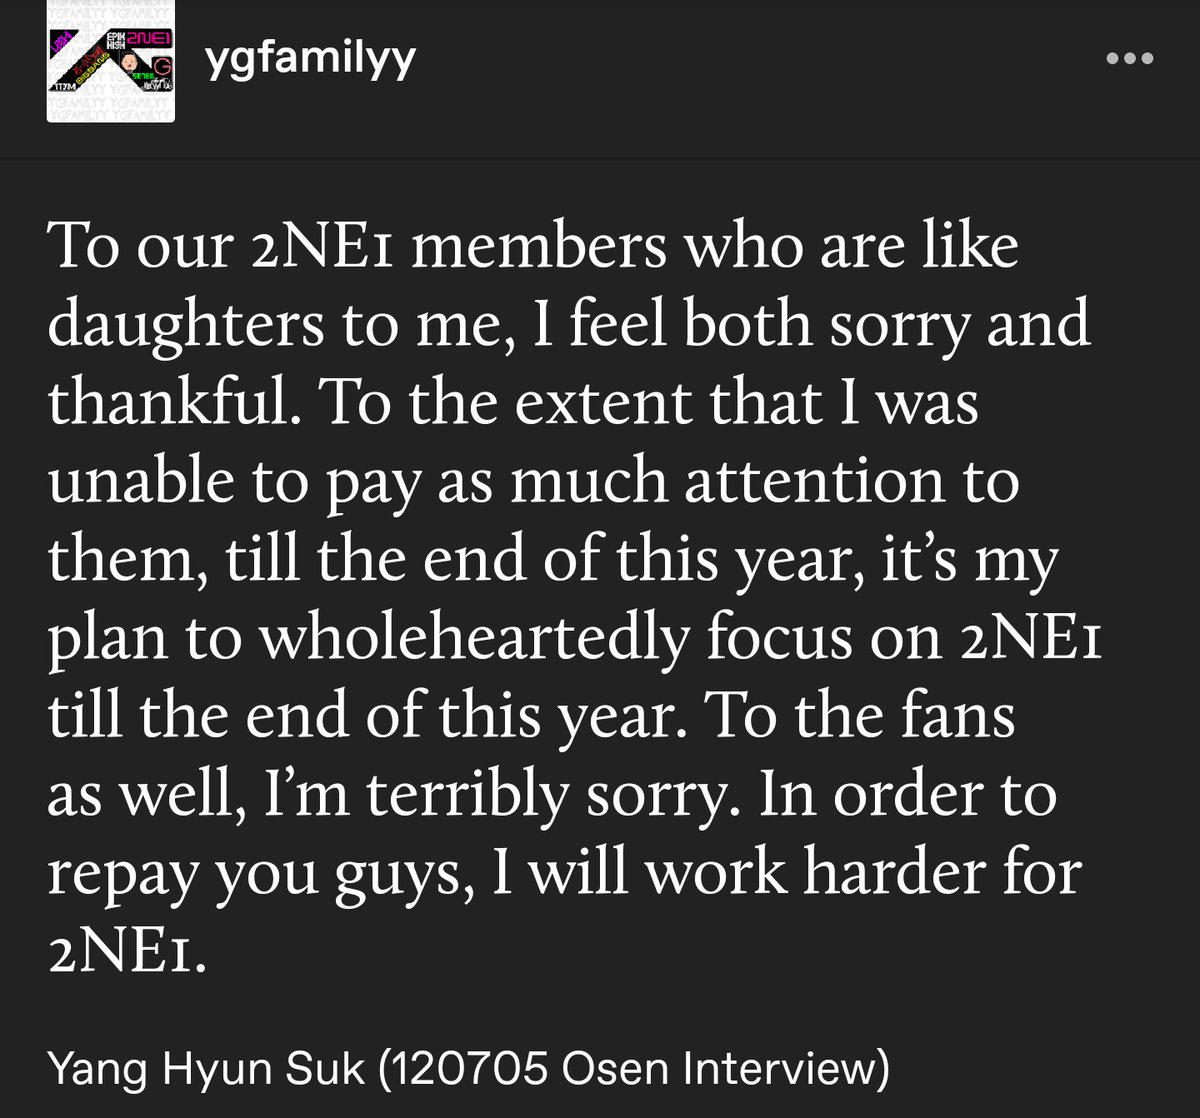 YHS constantly beating himself up when he was trying hard for 2ne1. I'm sure when they had to disband, in order to keep them in a deeper hiatus, he blamed and tortured himself over it. 2ne1 was his baby too...but sometimes things happen out of your control.